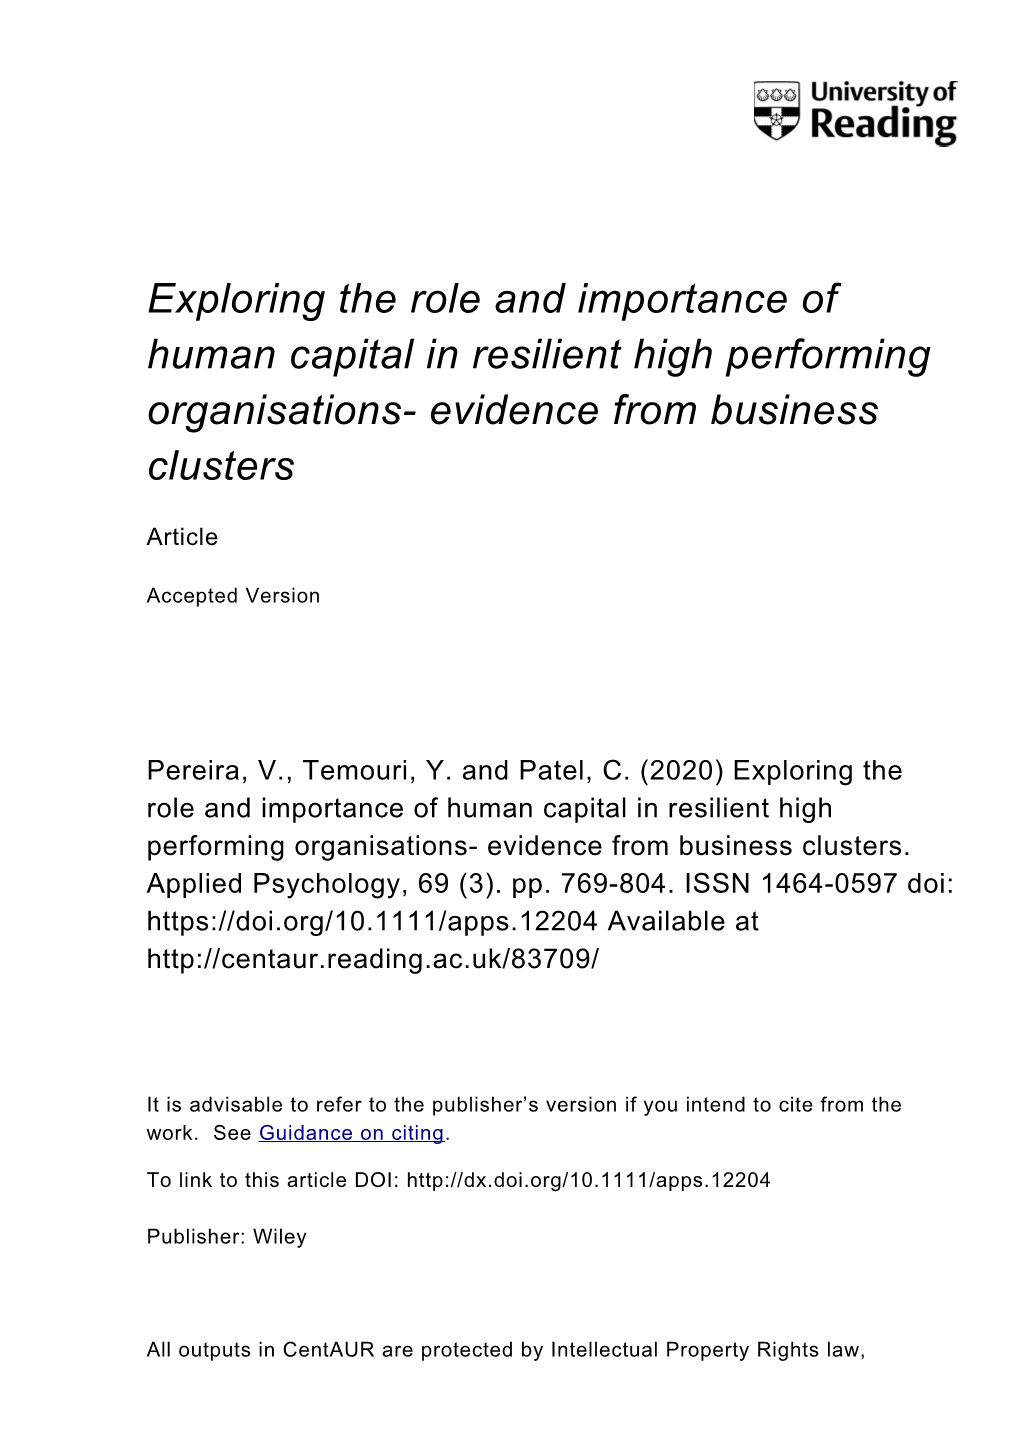 Exploring the Role and Importance of Human Capital in Resilient High Performing Organisations- Evidence from Business Clusters